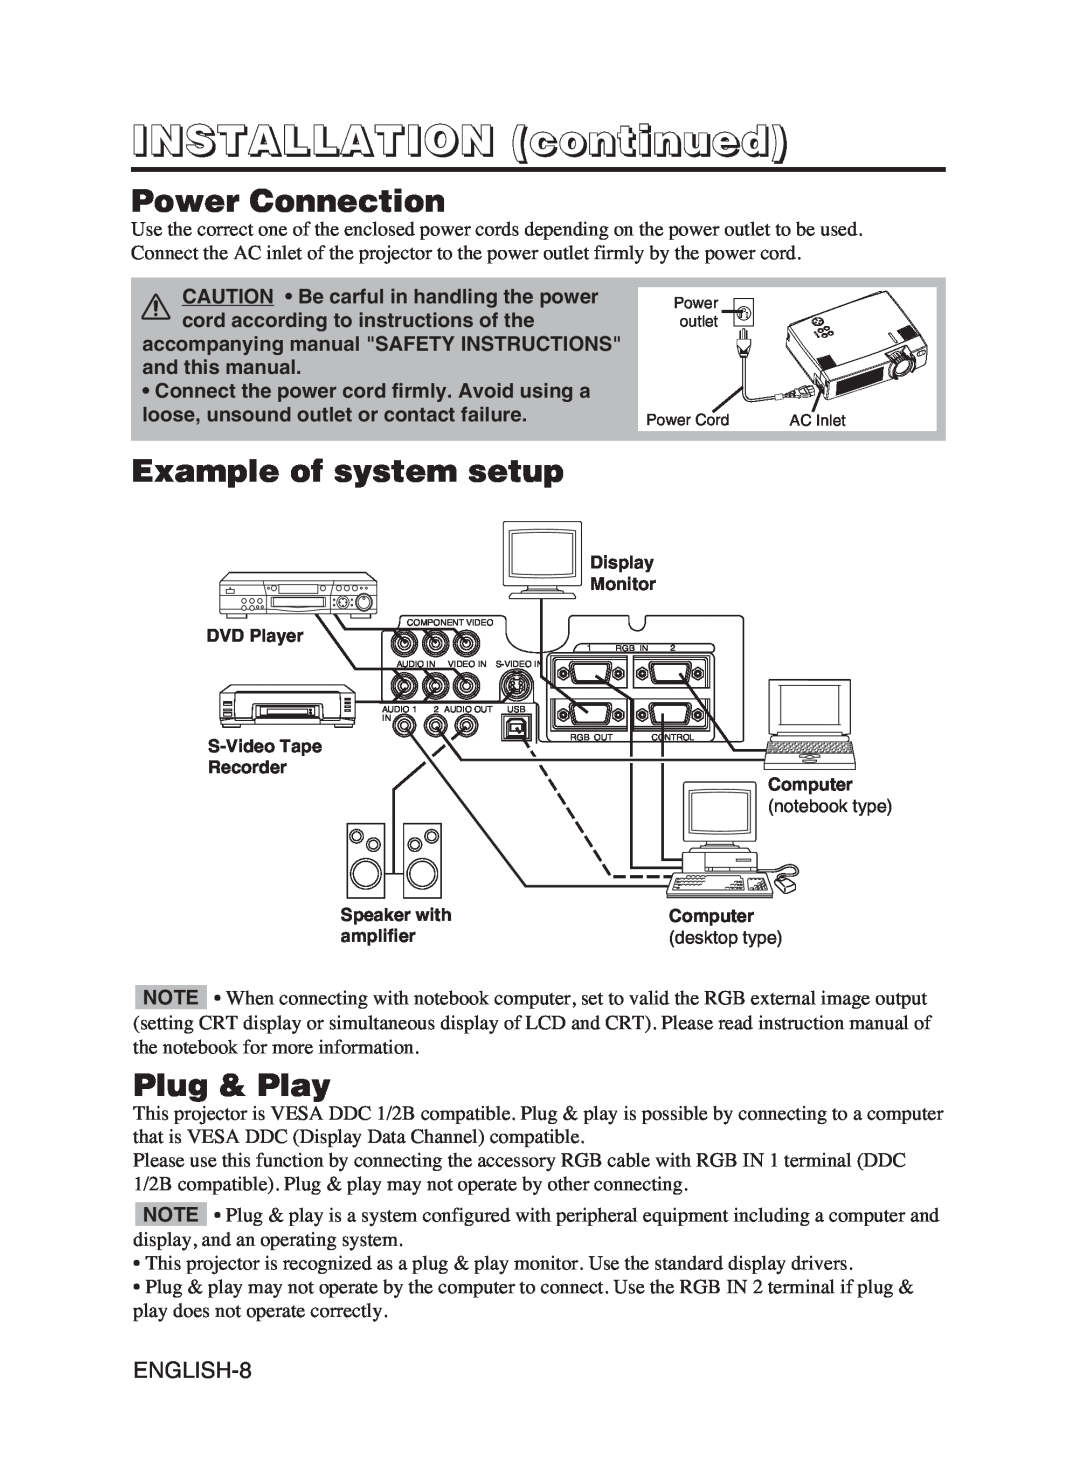 Hitachi CP-S370W user manual Power Connection, Example of system setup, Plug & Play, INSTALLATION continued, ENGLISH-8 